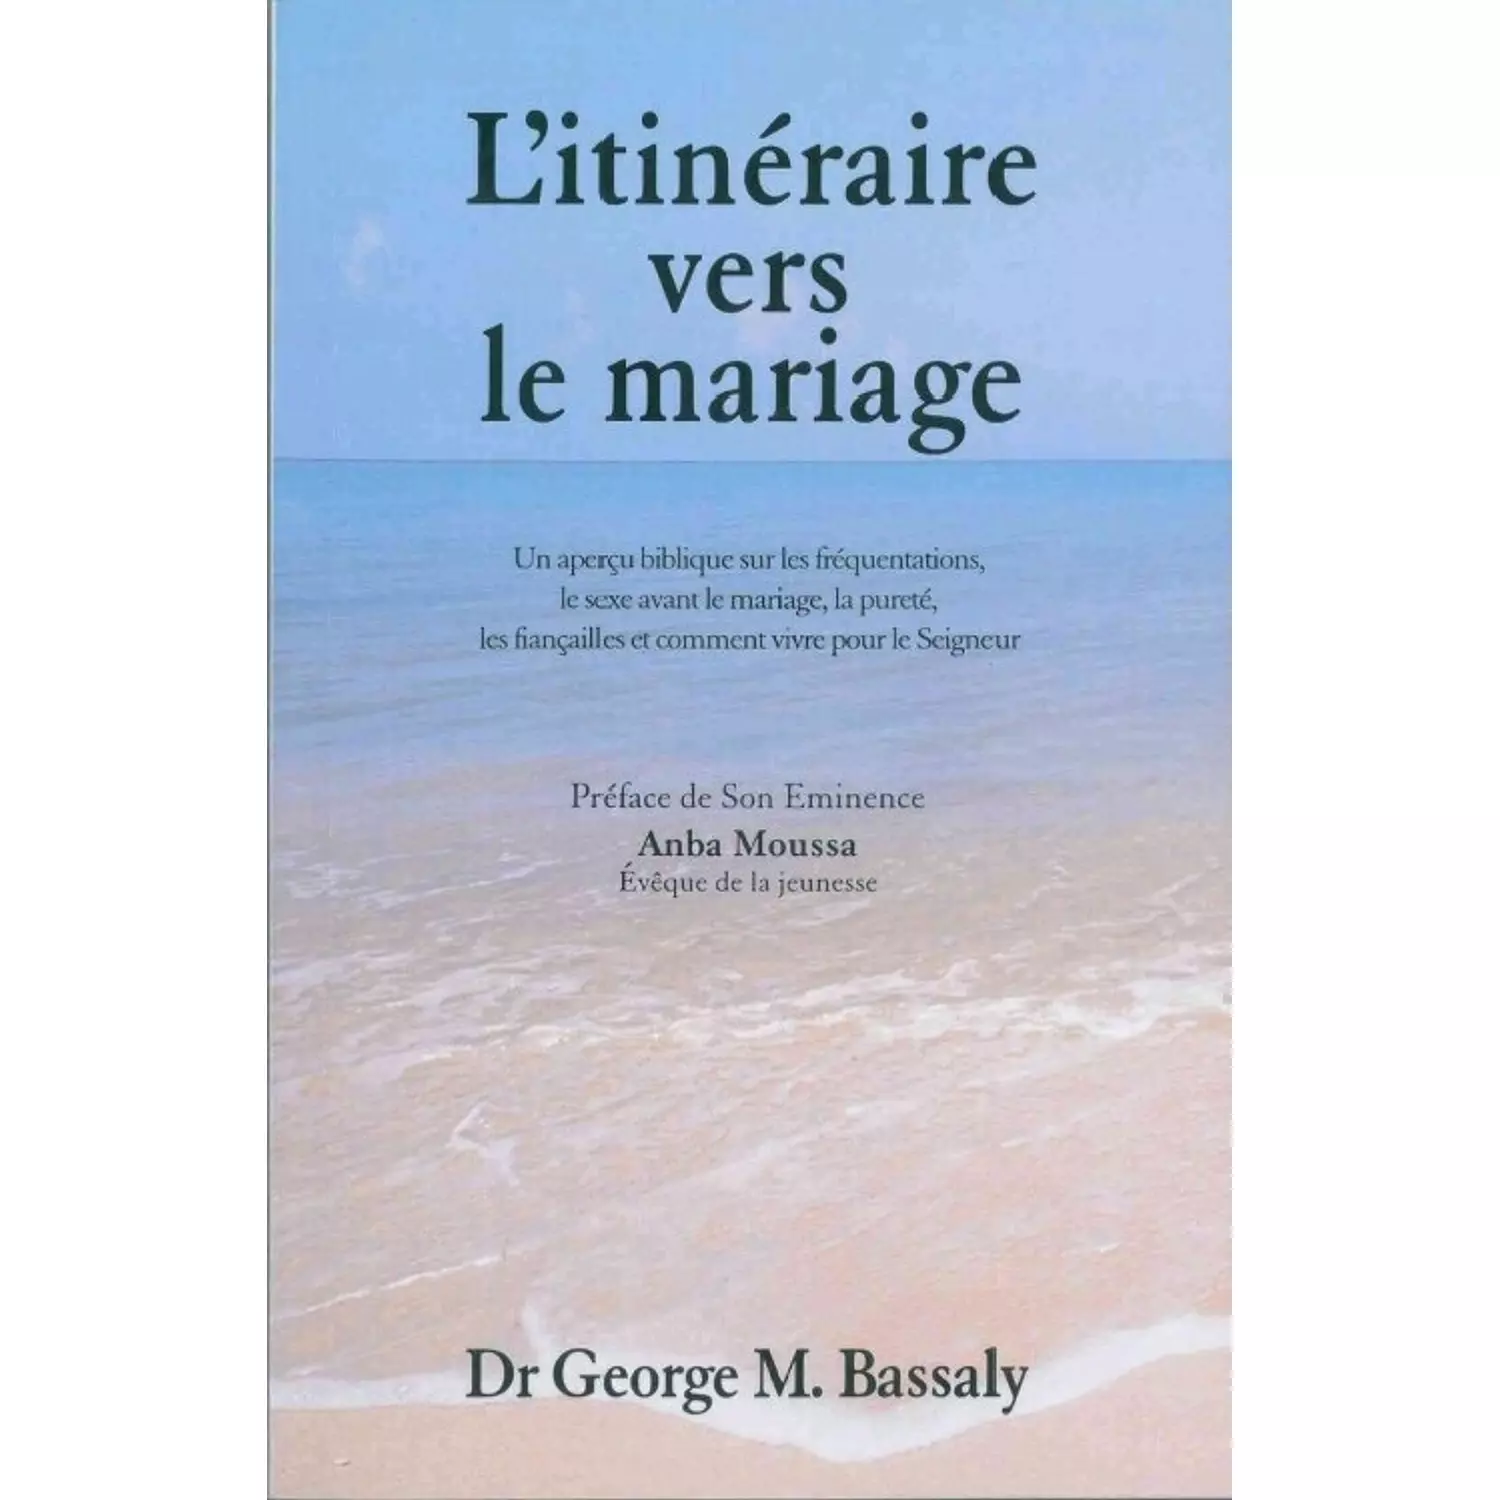 Litineraire vers le mariage hover image